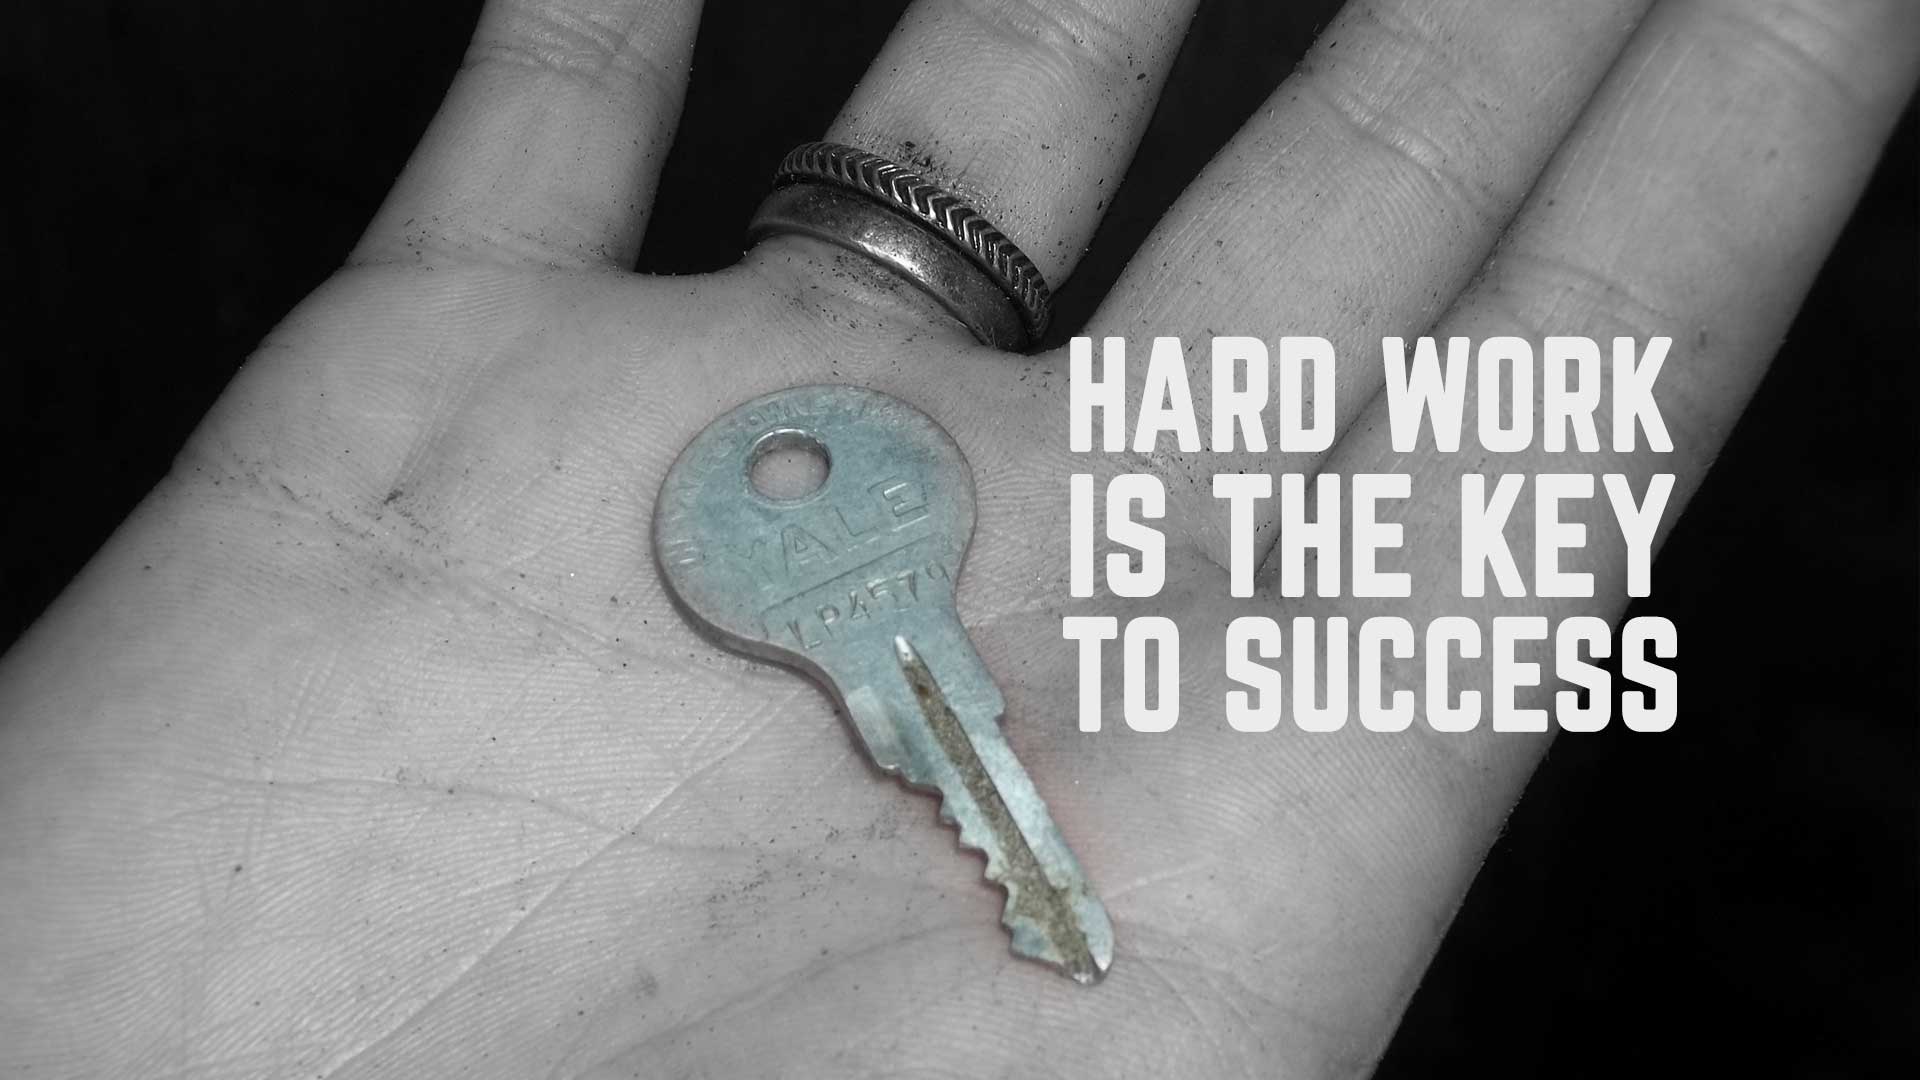 Hard-workis-the-key-to-success.-Life-Quote